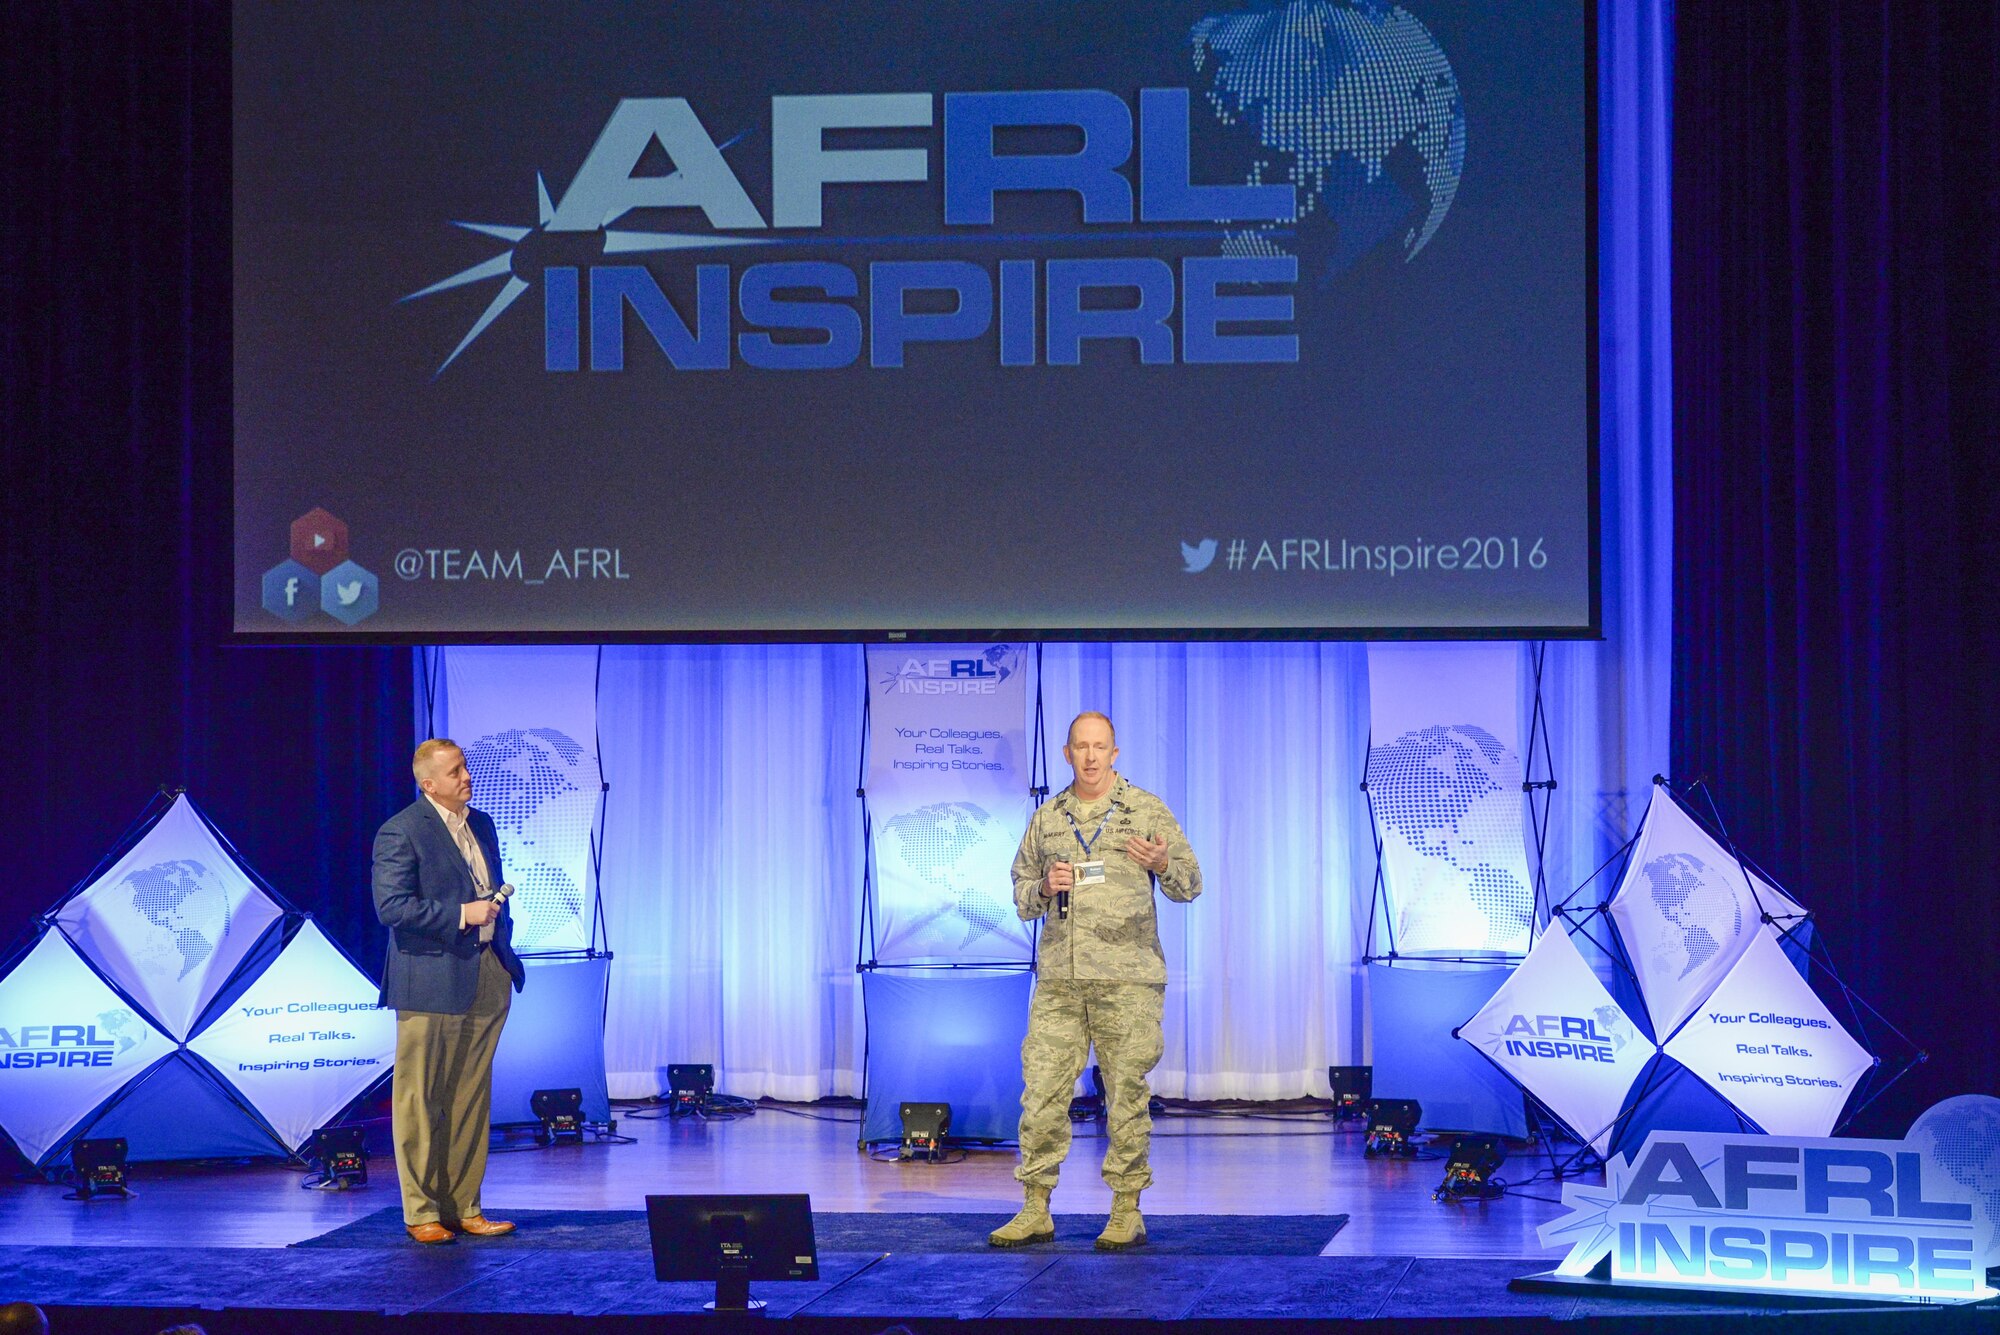 Maj. Gen. Robert D. McMurry Jr., commander of the Air Force Research Laboratory and Dr. Morley Stone, AFRL's Chief Technology Officer deliver opening remarks for the second annual AFRL Inspire event held Oct. 26 at the Dayton Art Institute. (U.S. Air Force photo/Wesley Farnsworth)